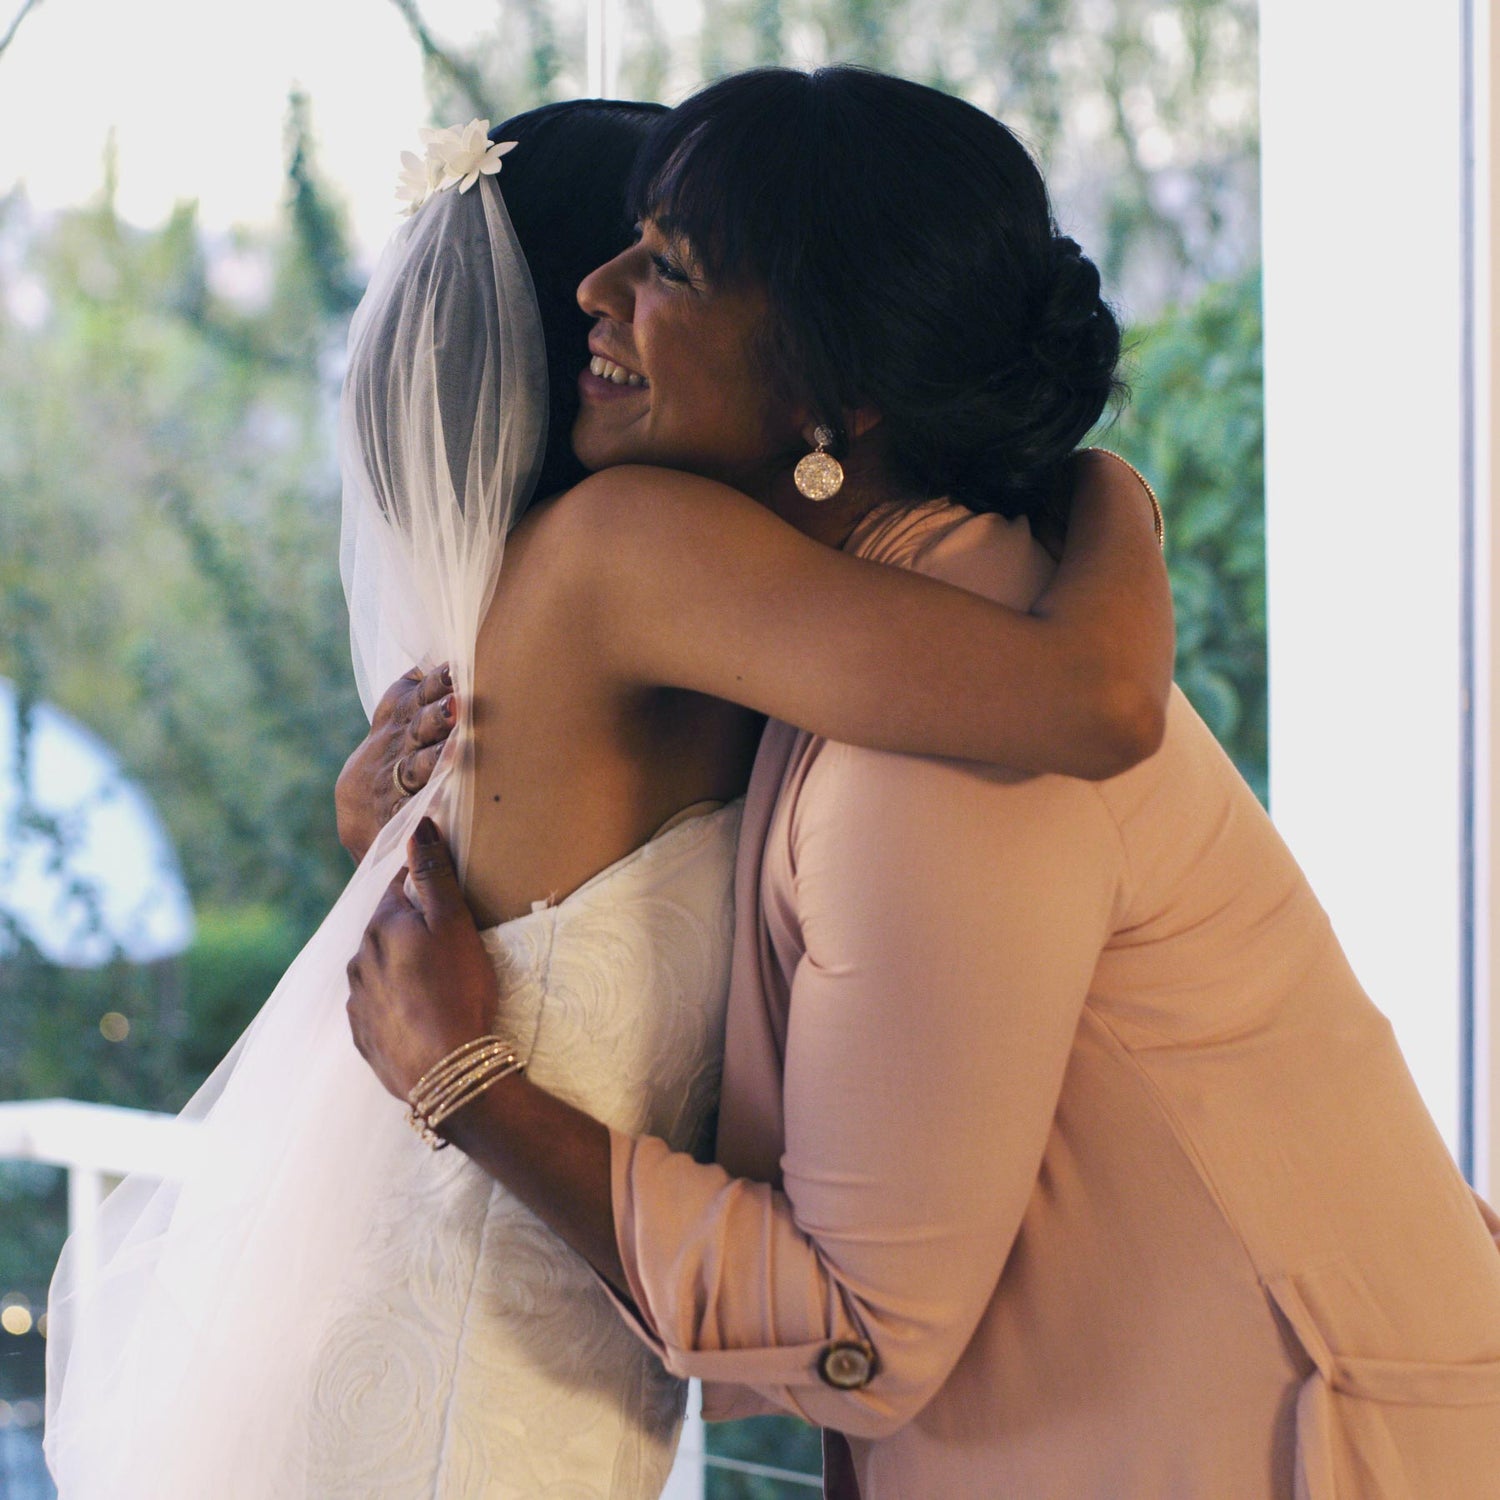 A joyous bride in her wedding dress embracing her mother in a pink dress, symbolizing a precious moment that calls for the perfect wedding gifts. This image encapsulates the love and joy that wedding gift ideas for couples and newlywed gifts are meant to celebrate.